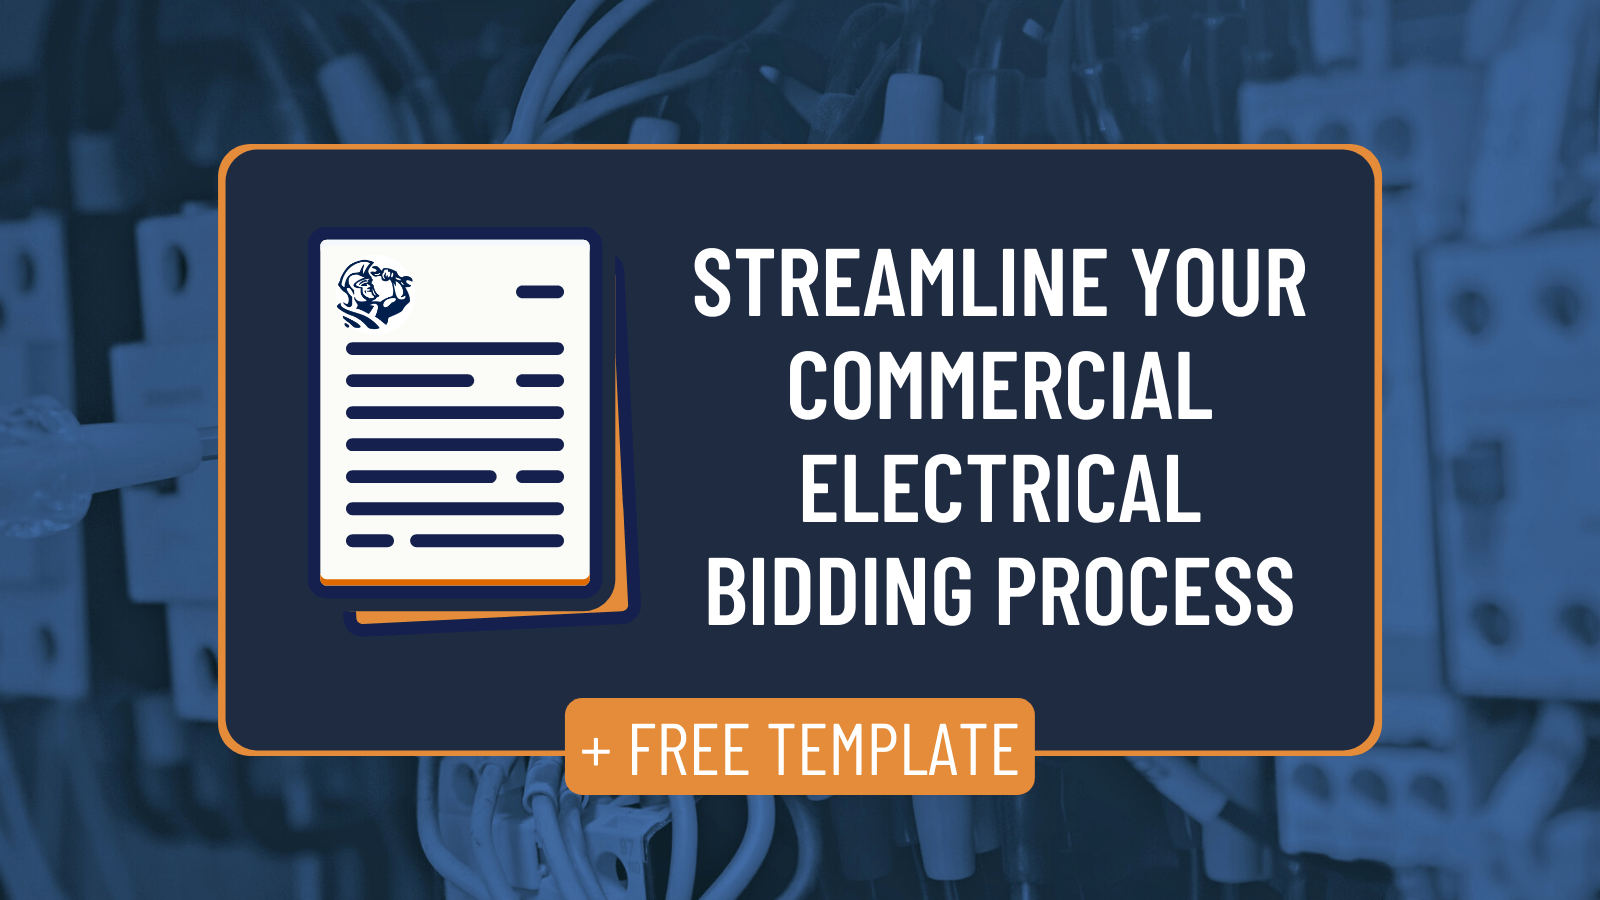 Commercial Electrical Bid Template: Streamline Your Bid Process and